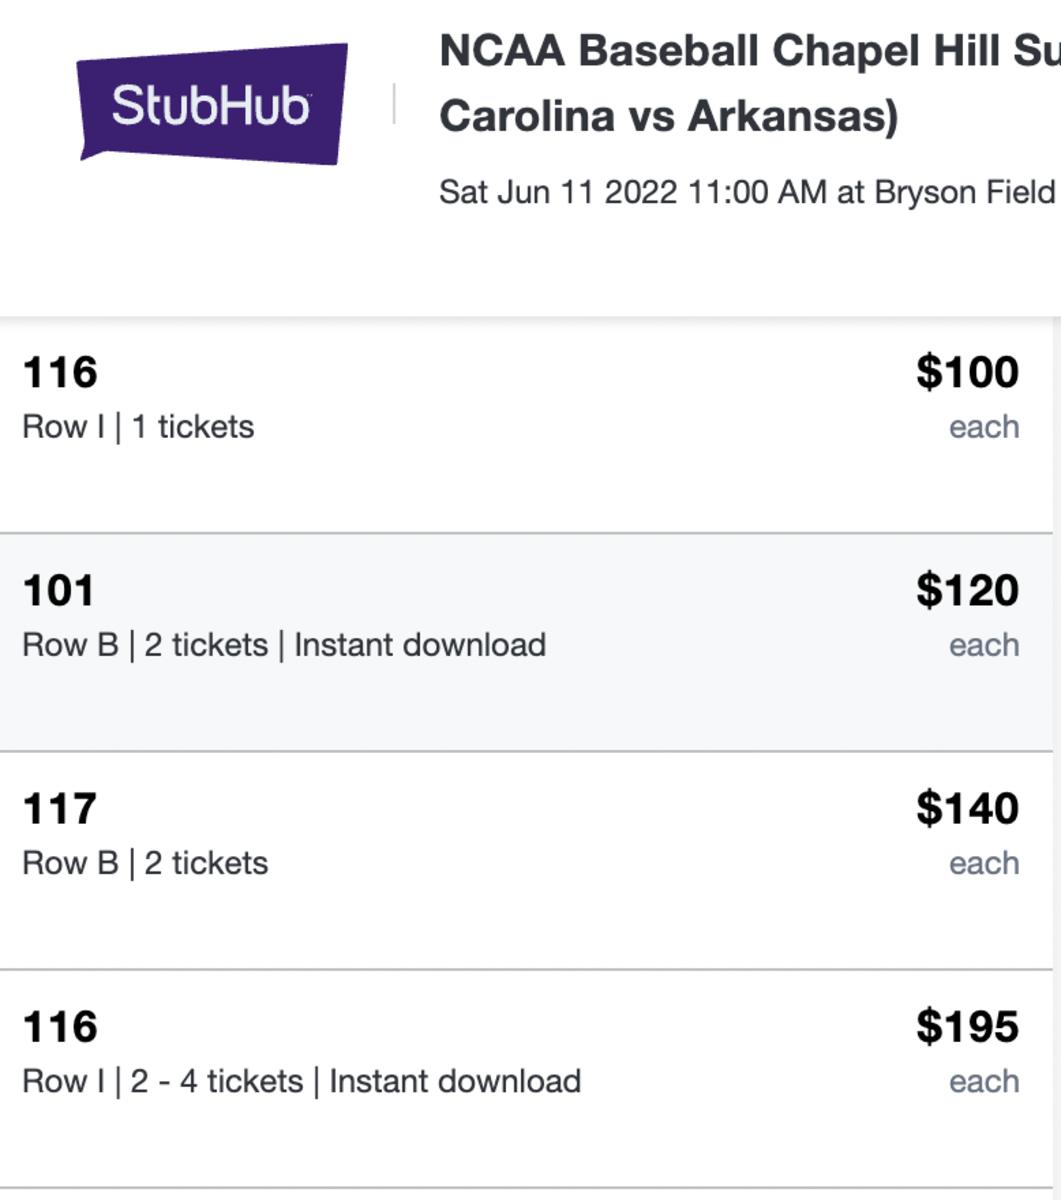 An image of tickets for sale to the Chapel Hill super regional on Stubhub.